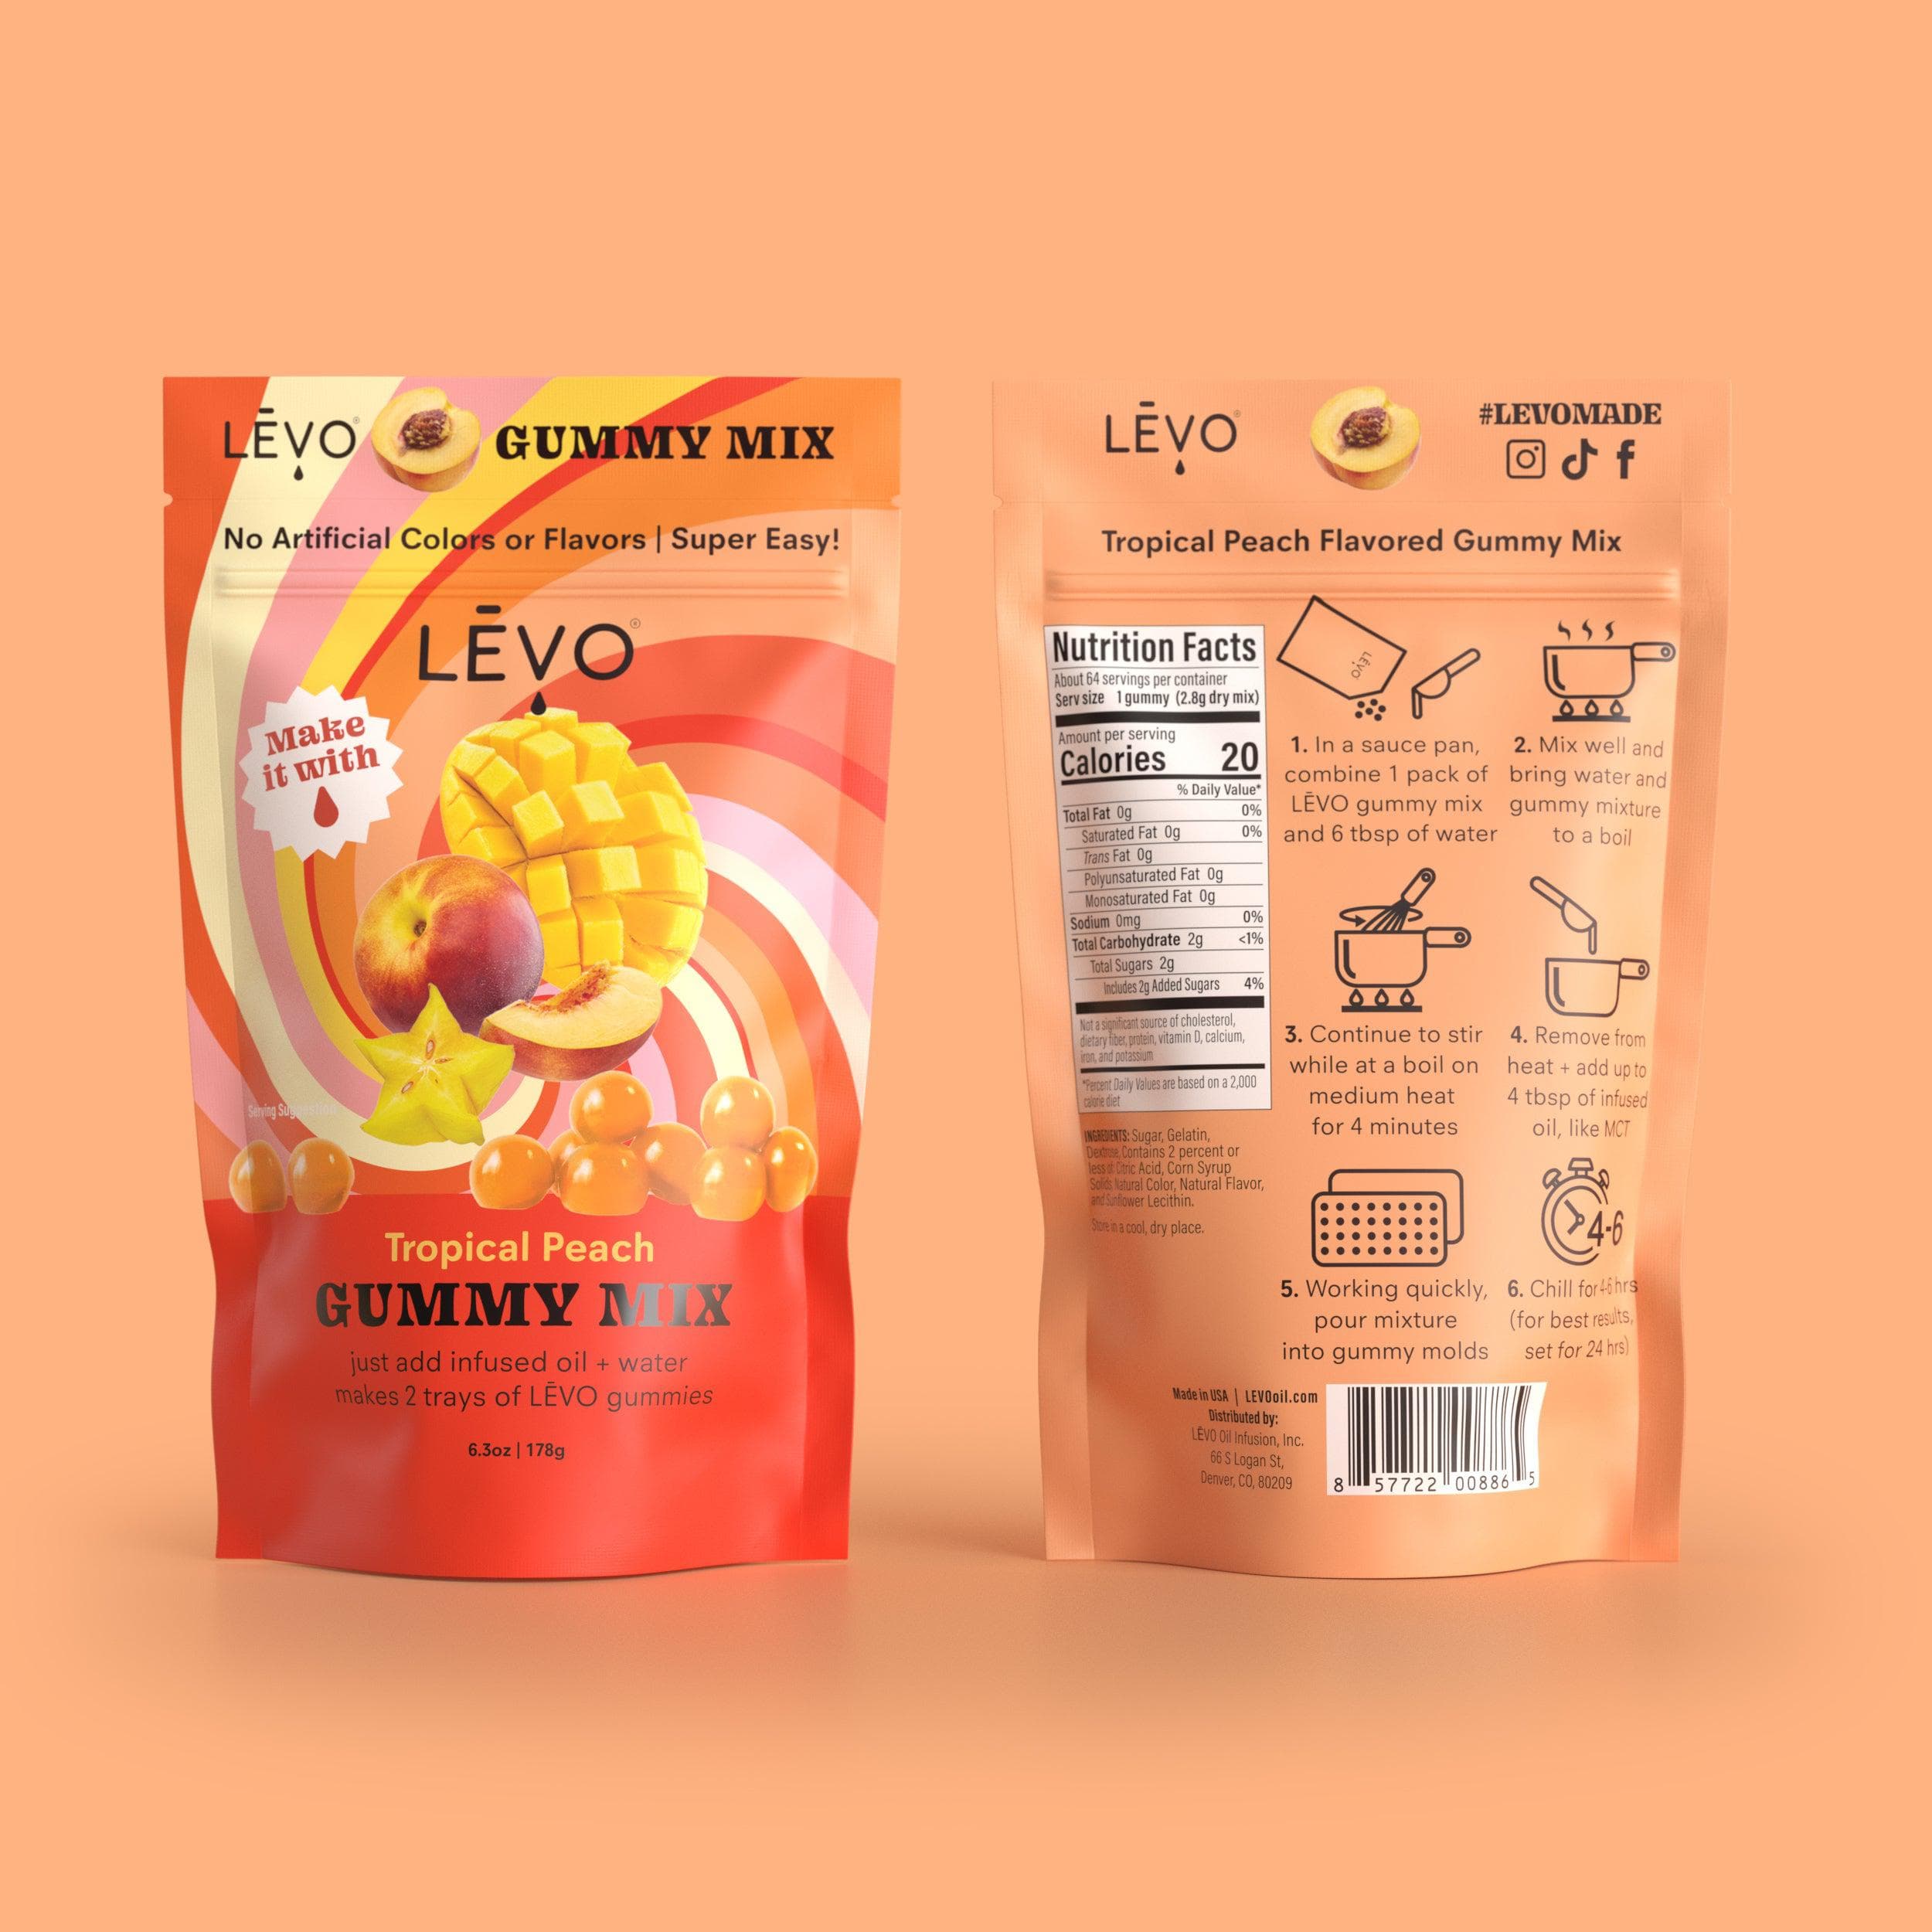 LEVO Gummy Mix Tropical Peach packaging front and back.